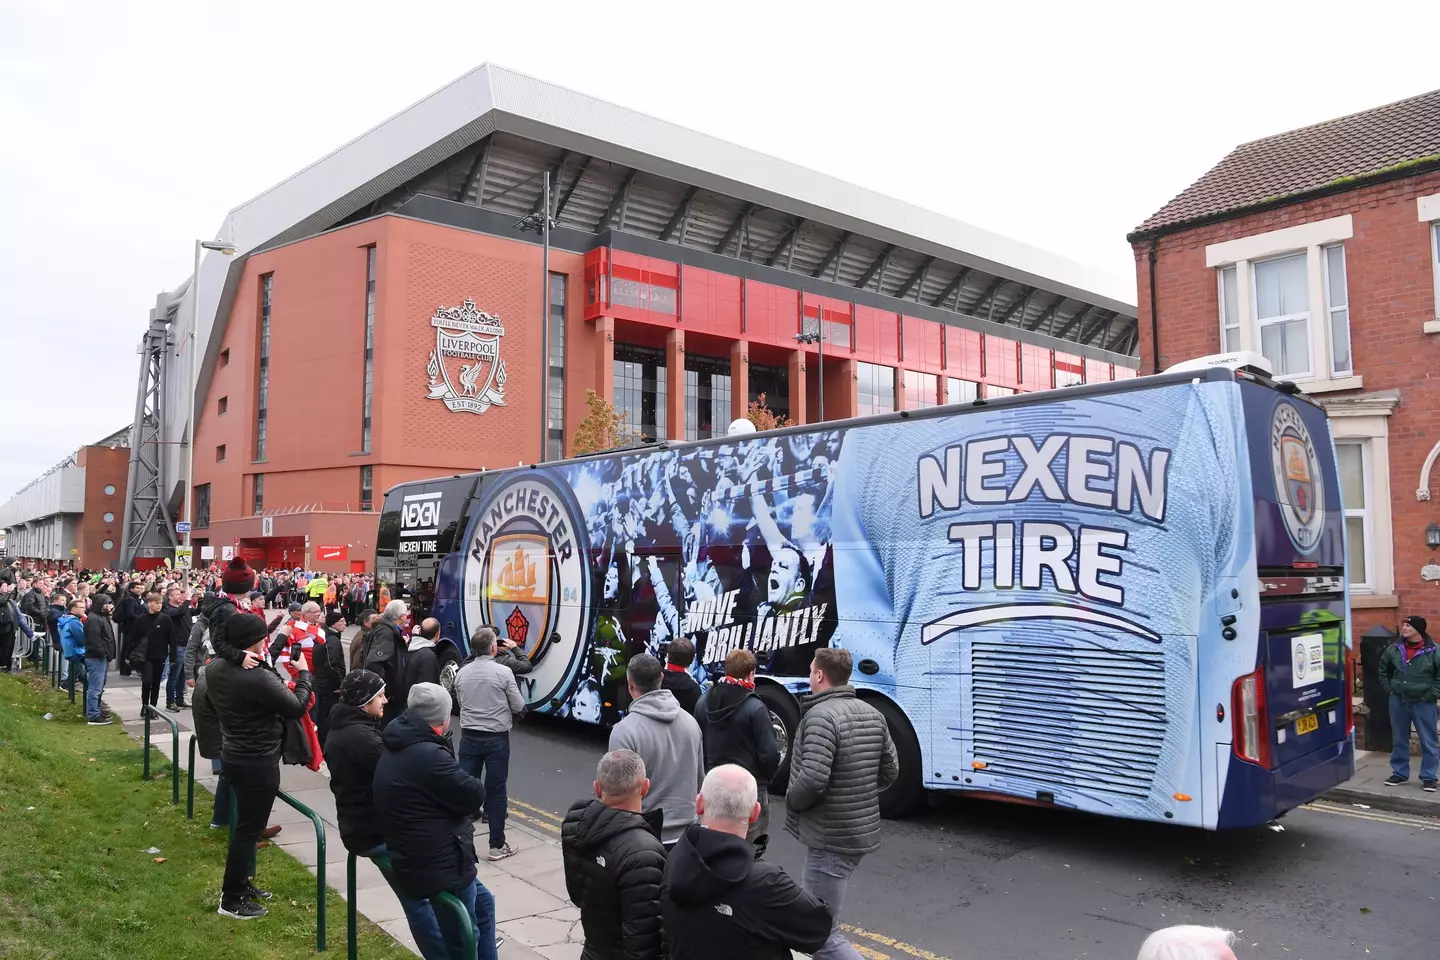 Manchester City's bus arrives at Anfield for a Premier League fixture. Image: Getty